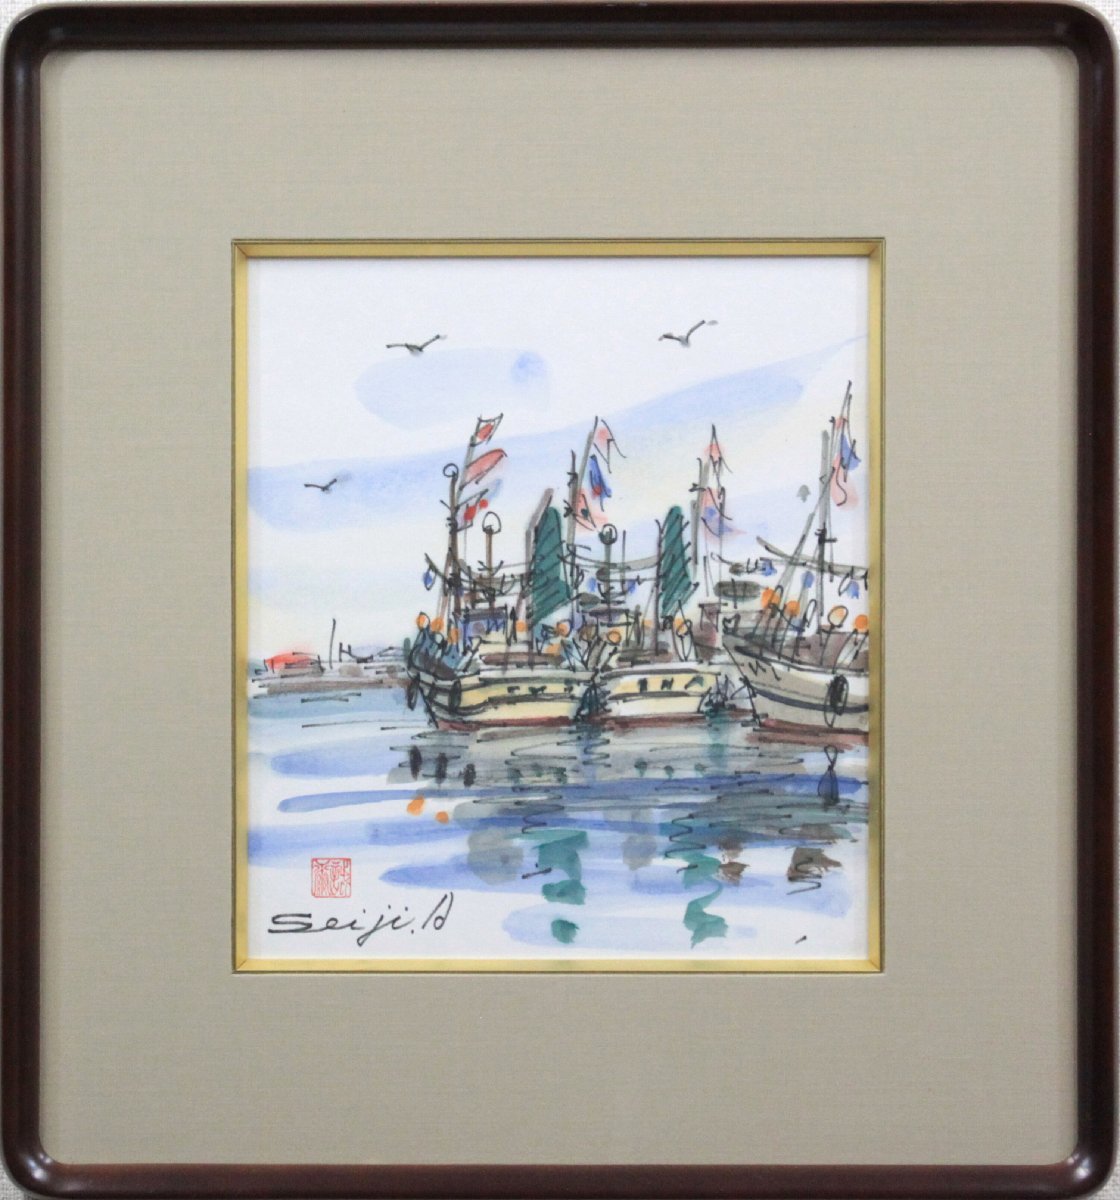 Seiji Aotsuka Fishing Port Festival Day watercolor painting - Hokkaido Gallery, Painting, watercolor, Nature, Landscape painting